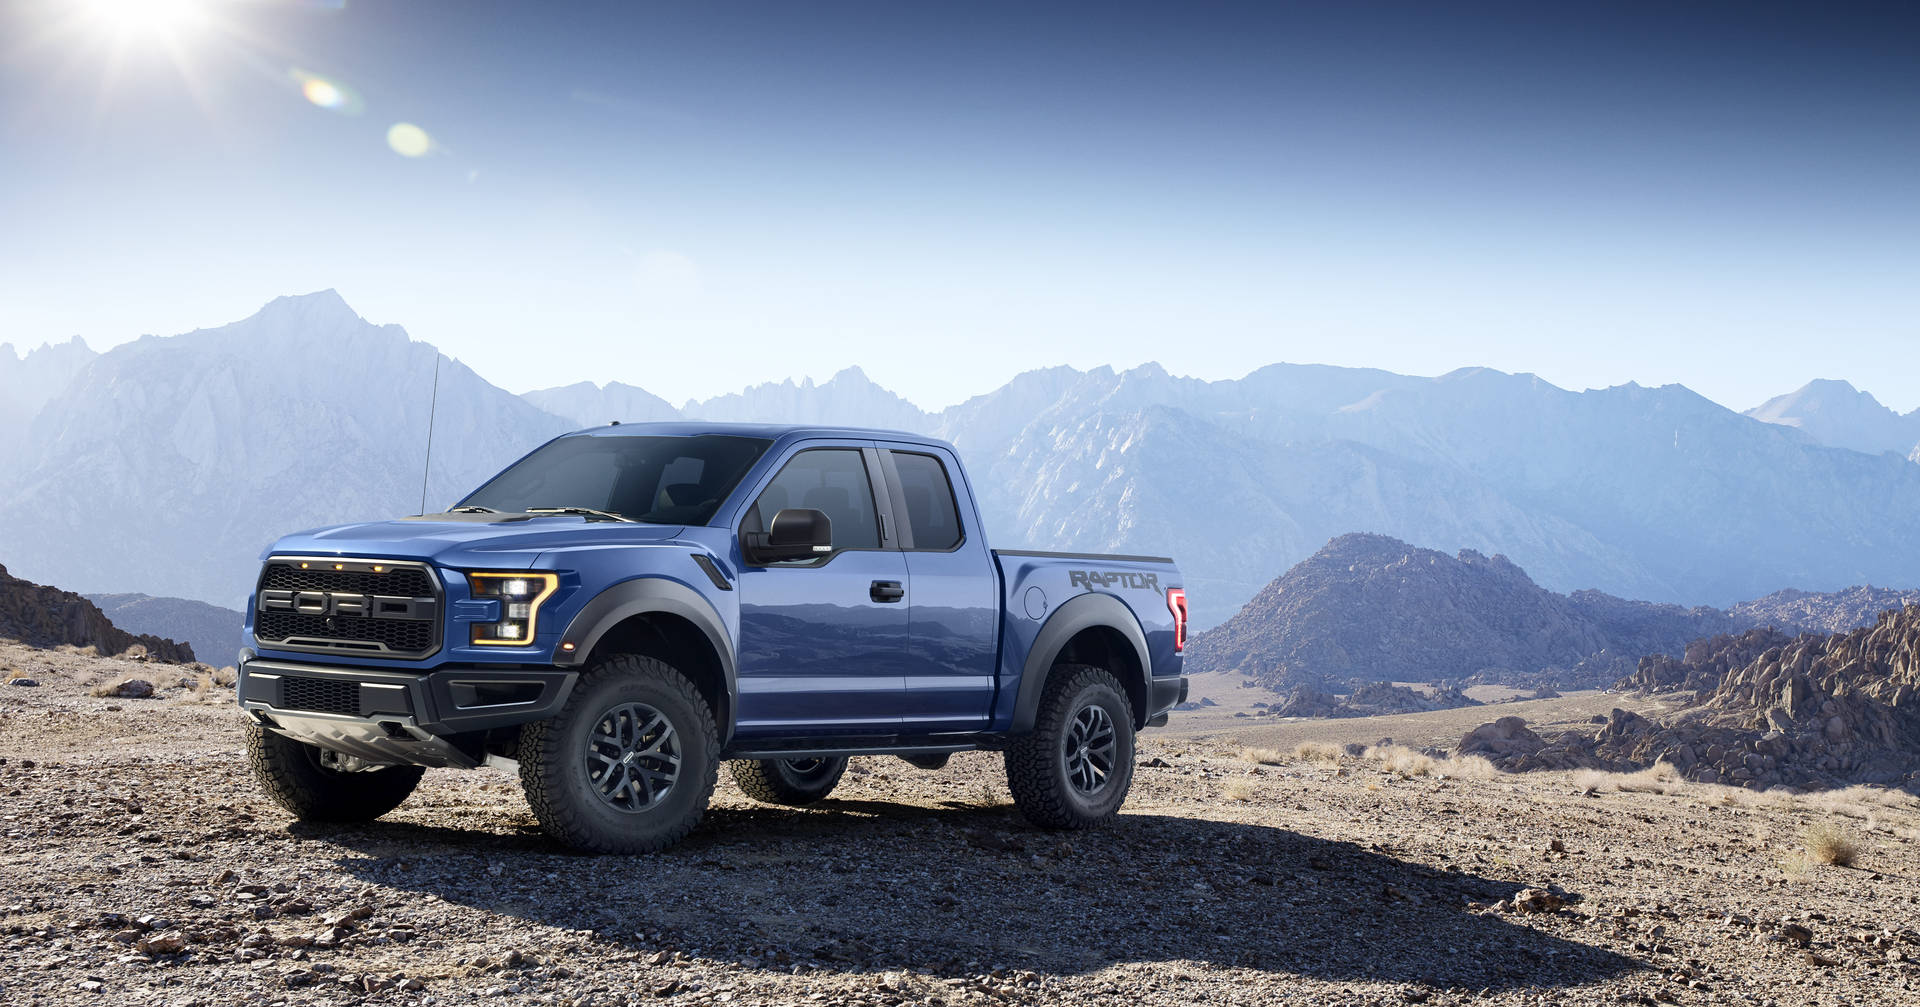 Ford Raptor With View Of Mountain Background